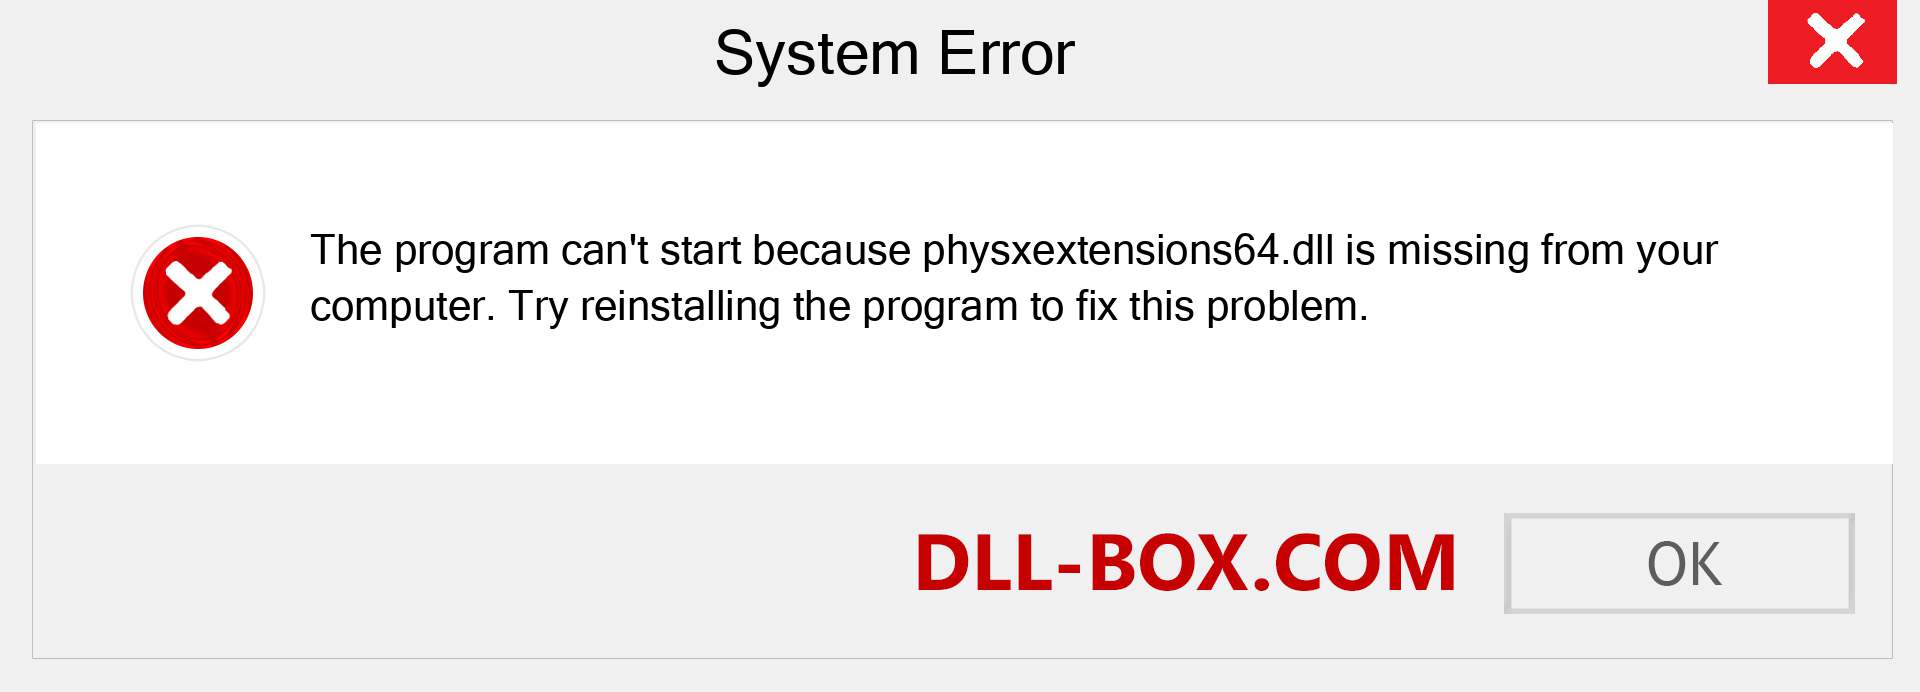  physxextensions64.dll file is missing?. Download for Windows 7, 8, 10 - Fix  physxextensions64 dll Missing Error on Windows, photos, images